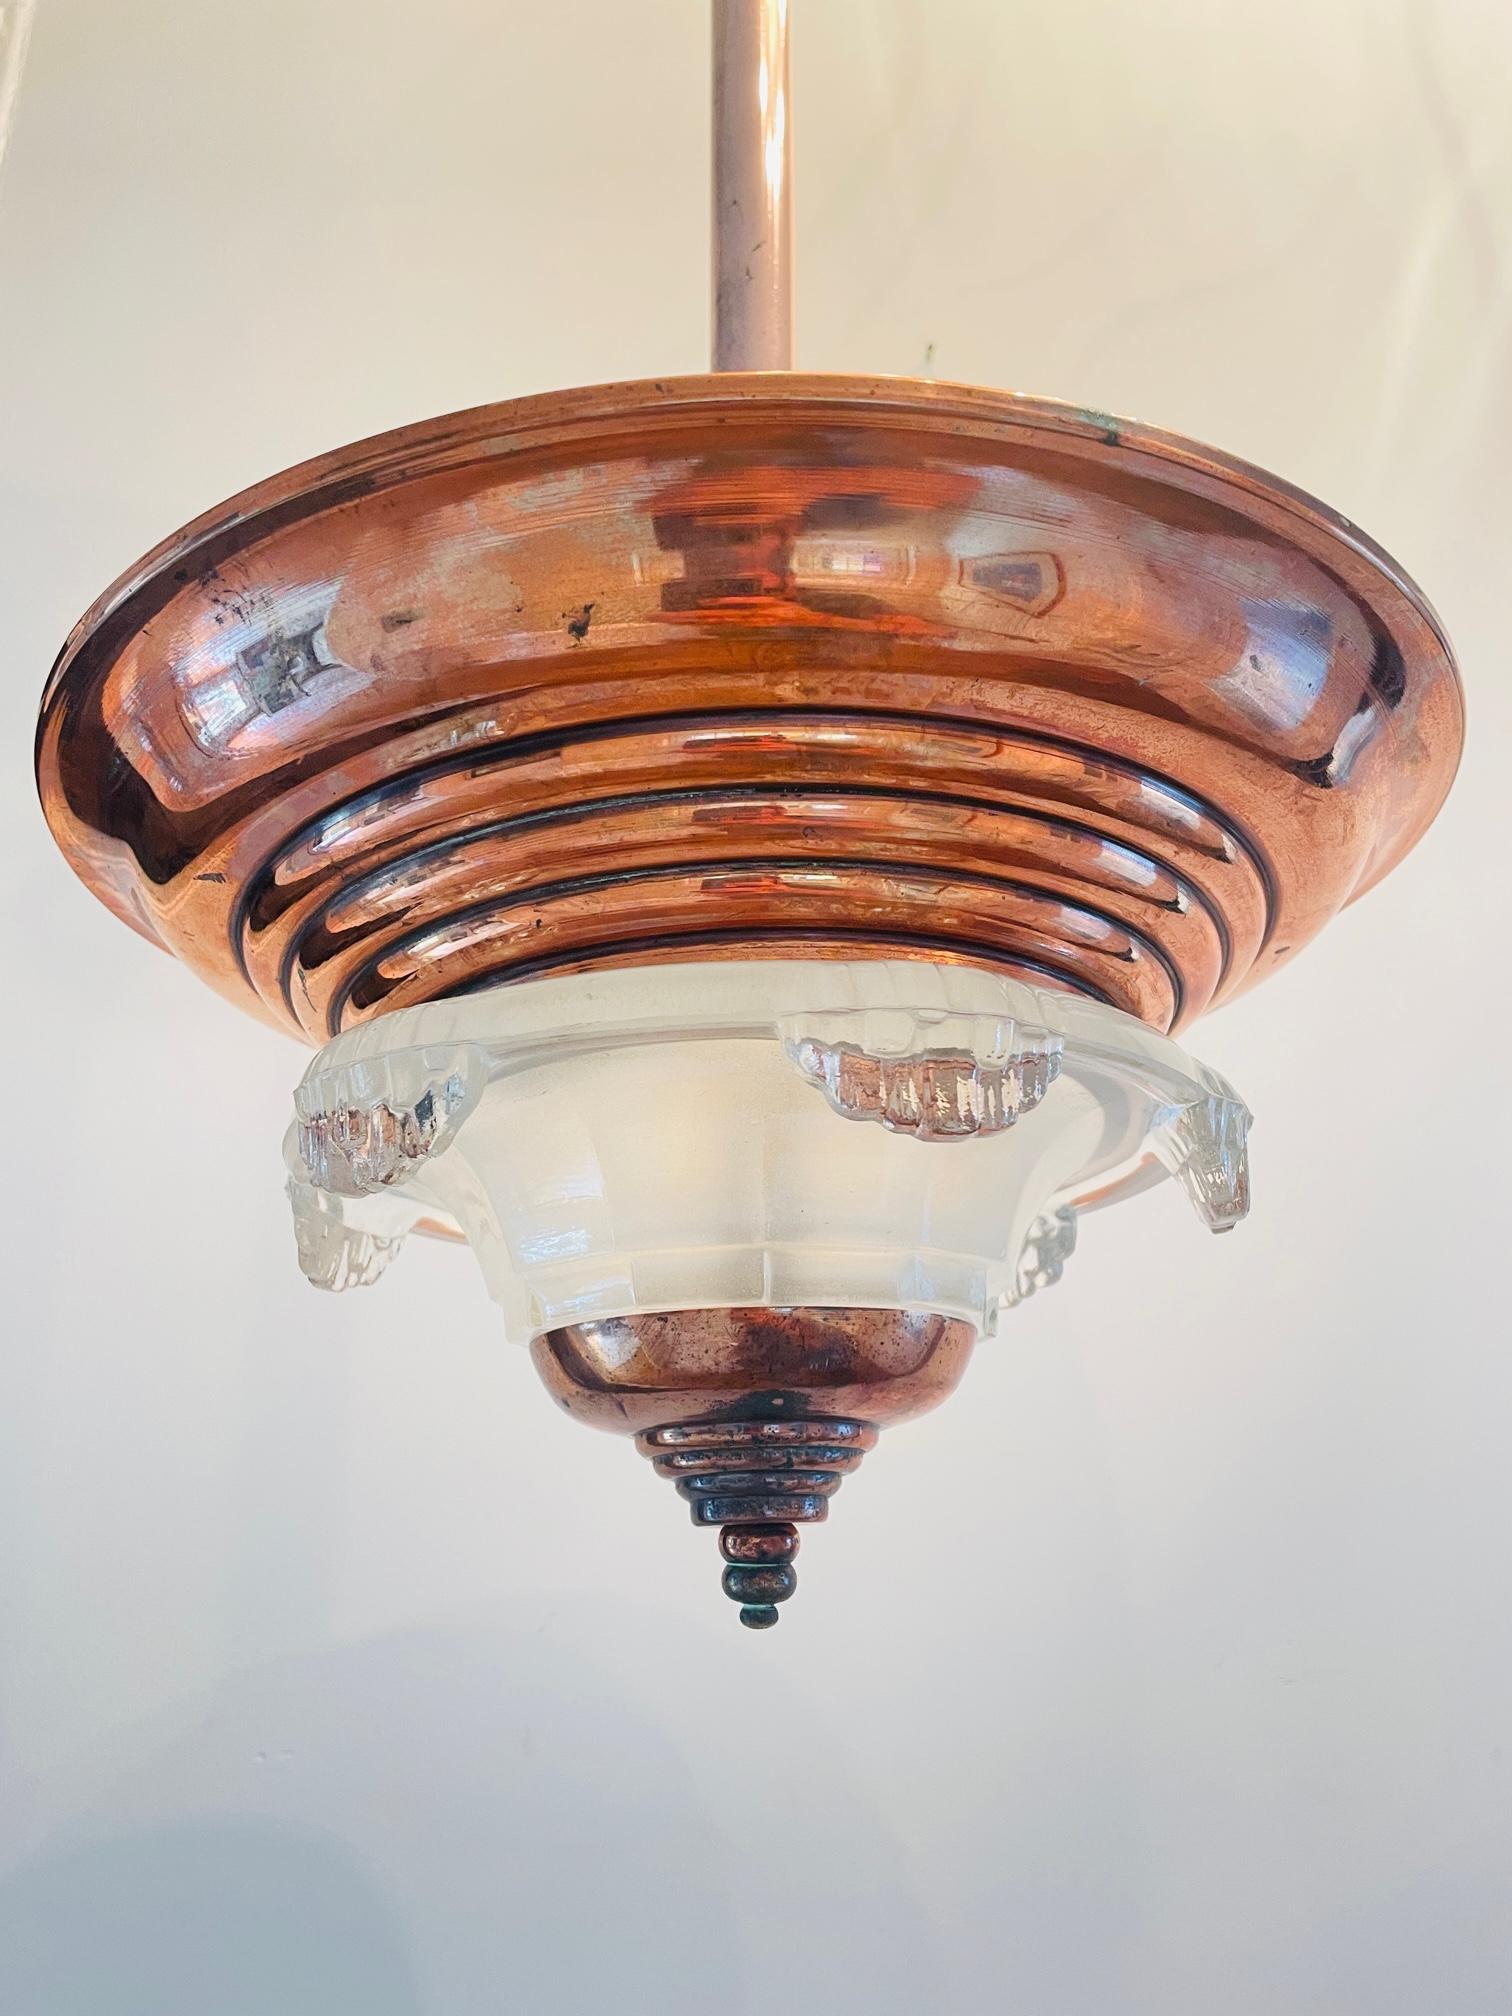 Moulded glass and copper chandelier or lustre, French Luminaire probably made circa 1940. In great vintage condition. Can be polished to 'gold' but I prefer the copper colour like it is now.
Perfect for every bar, home, restaurant, hotel, lobby or